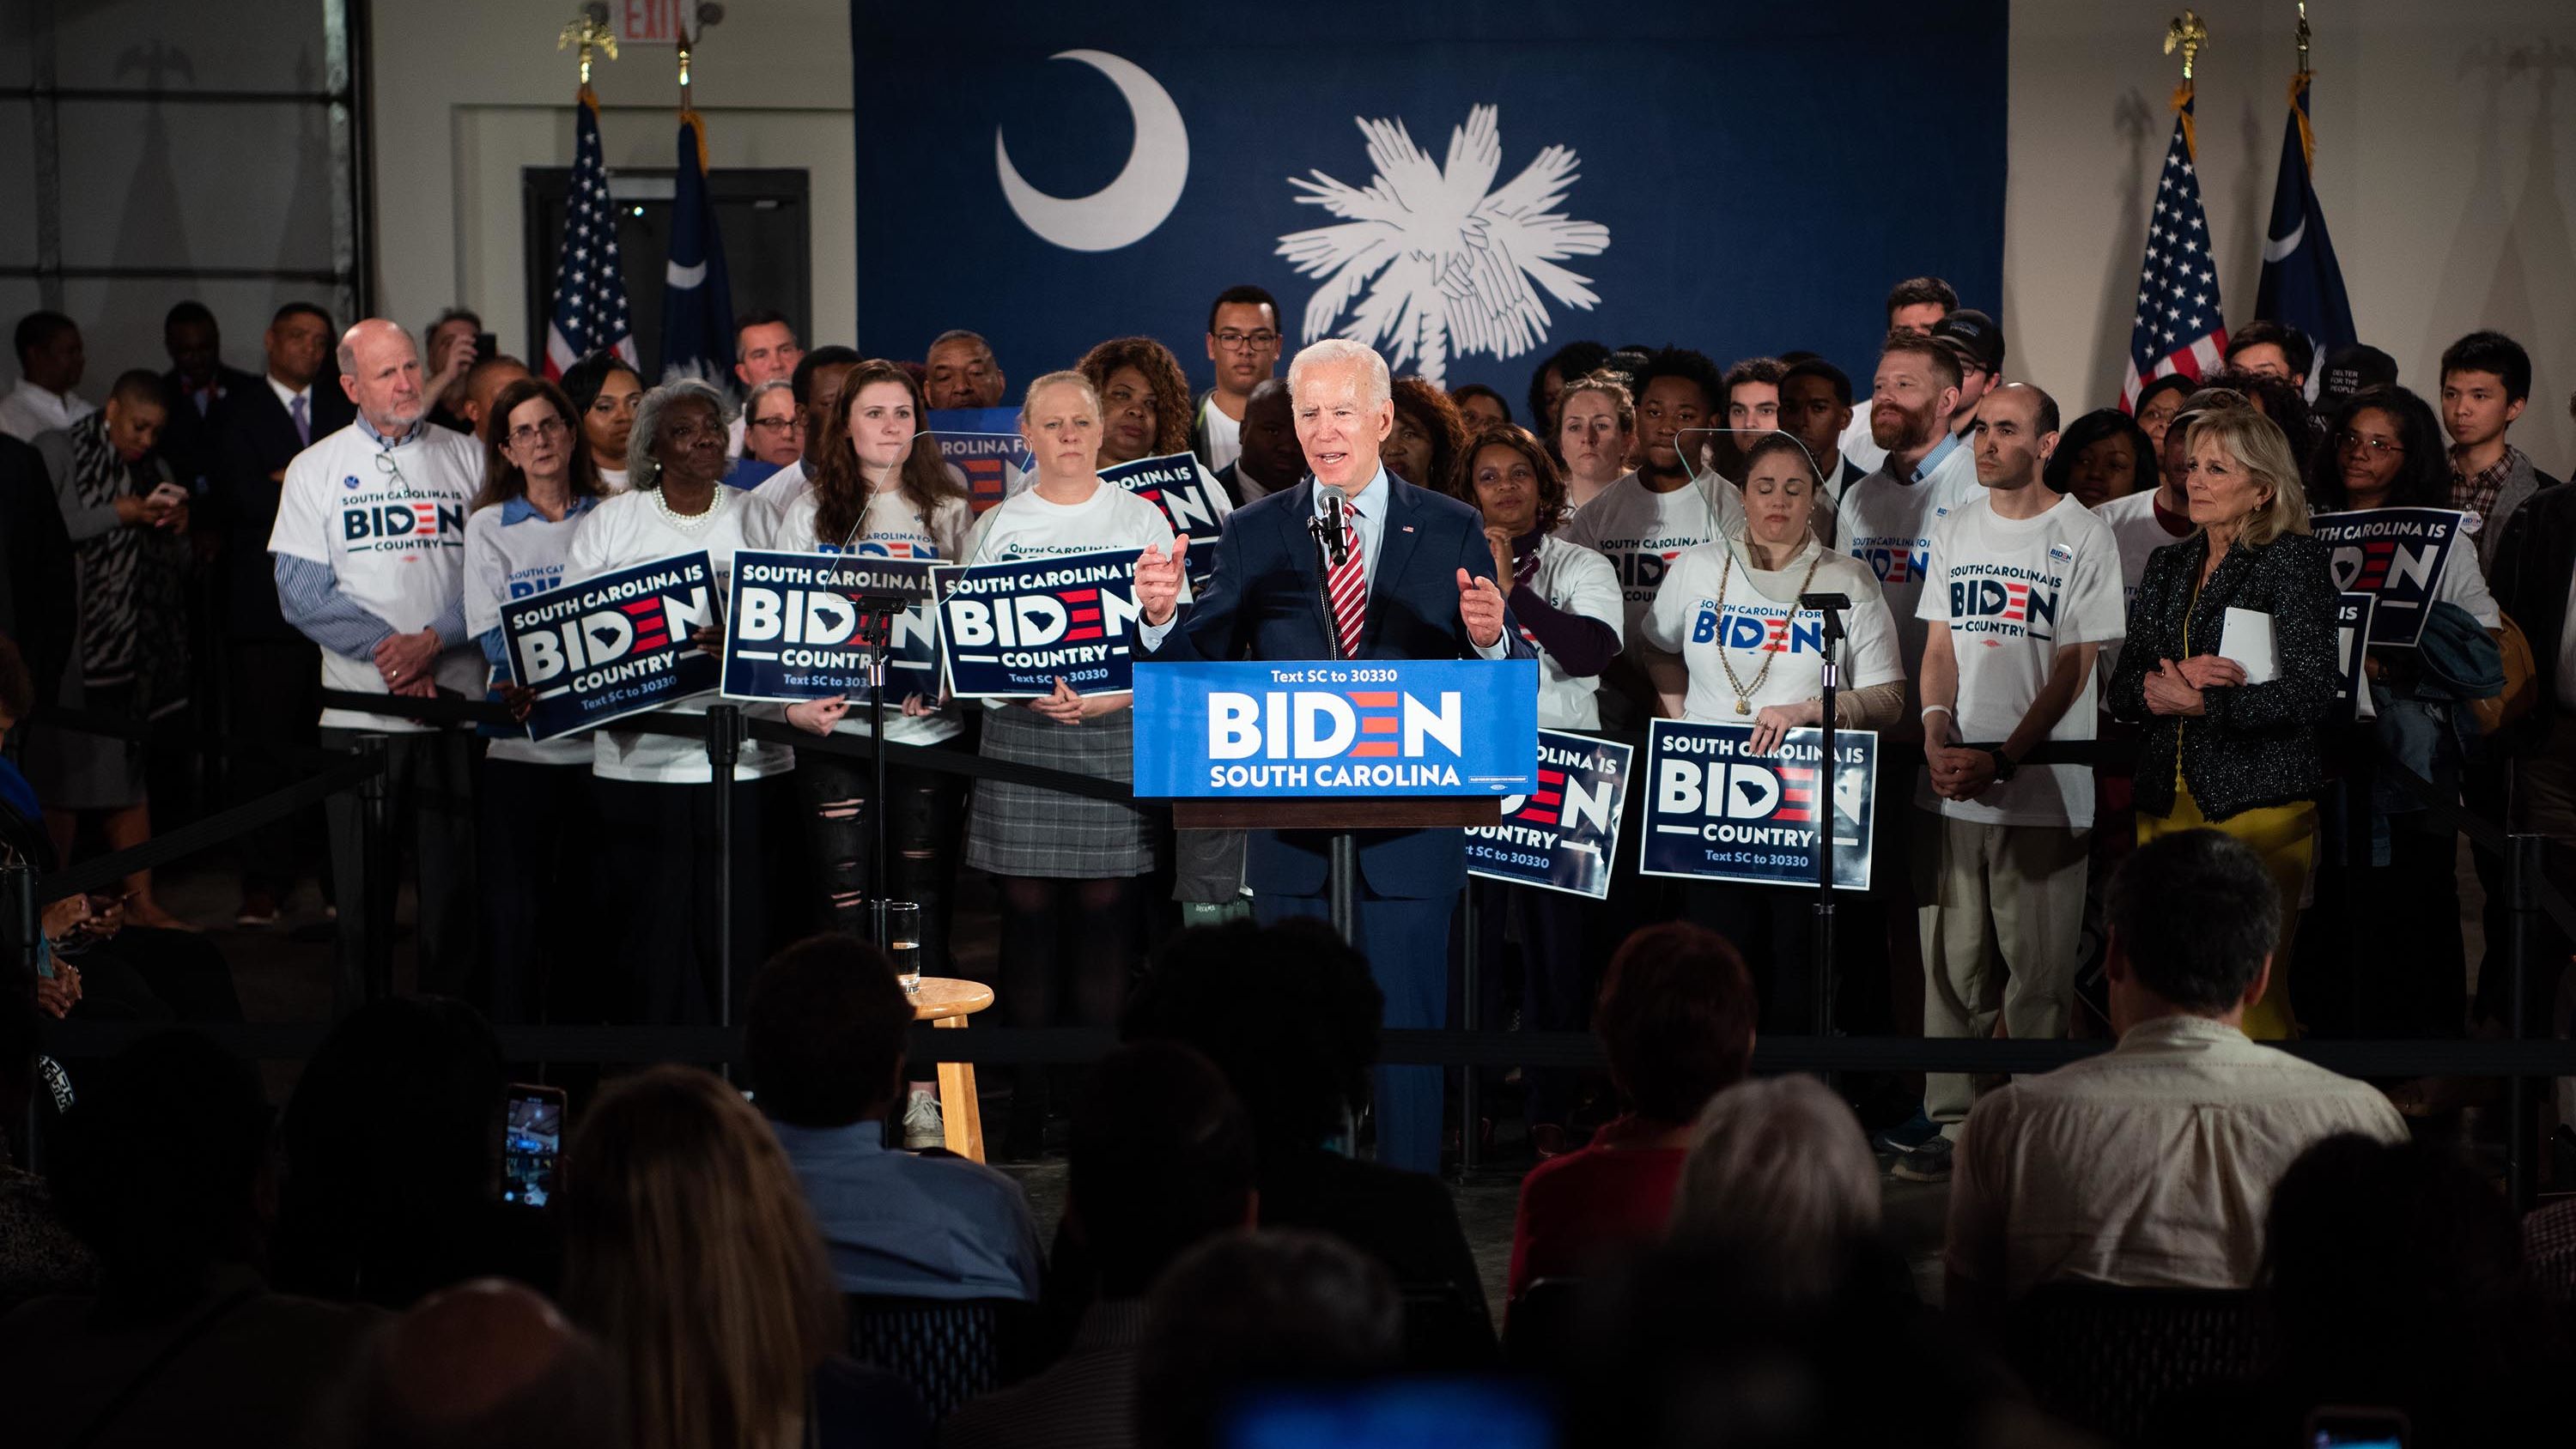 Biden addresses the crowd during a South Carolina campaign launch party on February 11 in Columbia, South Carolina. 